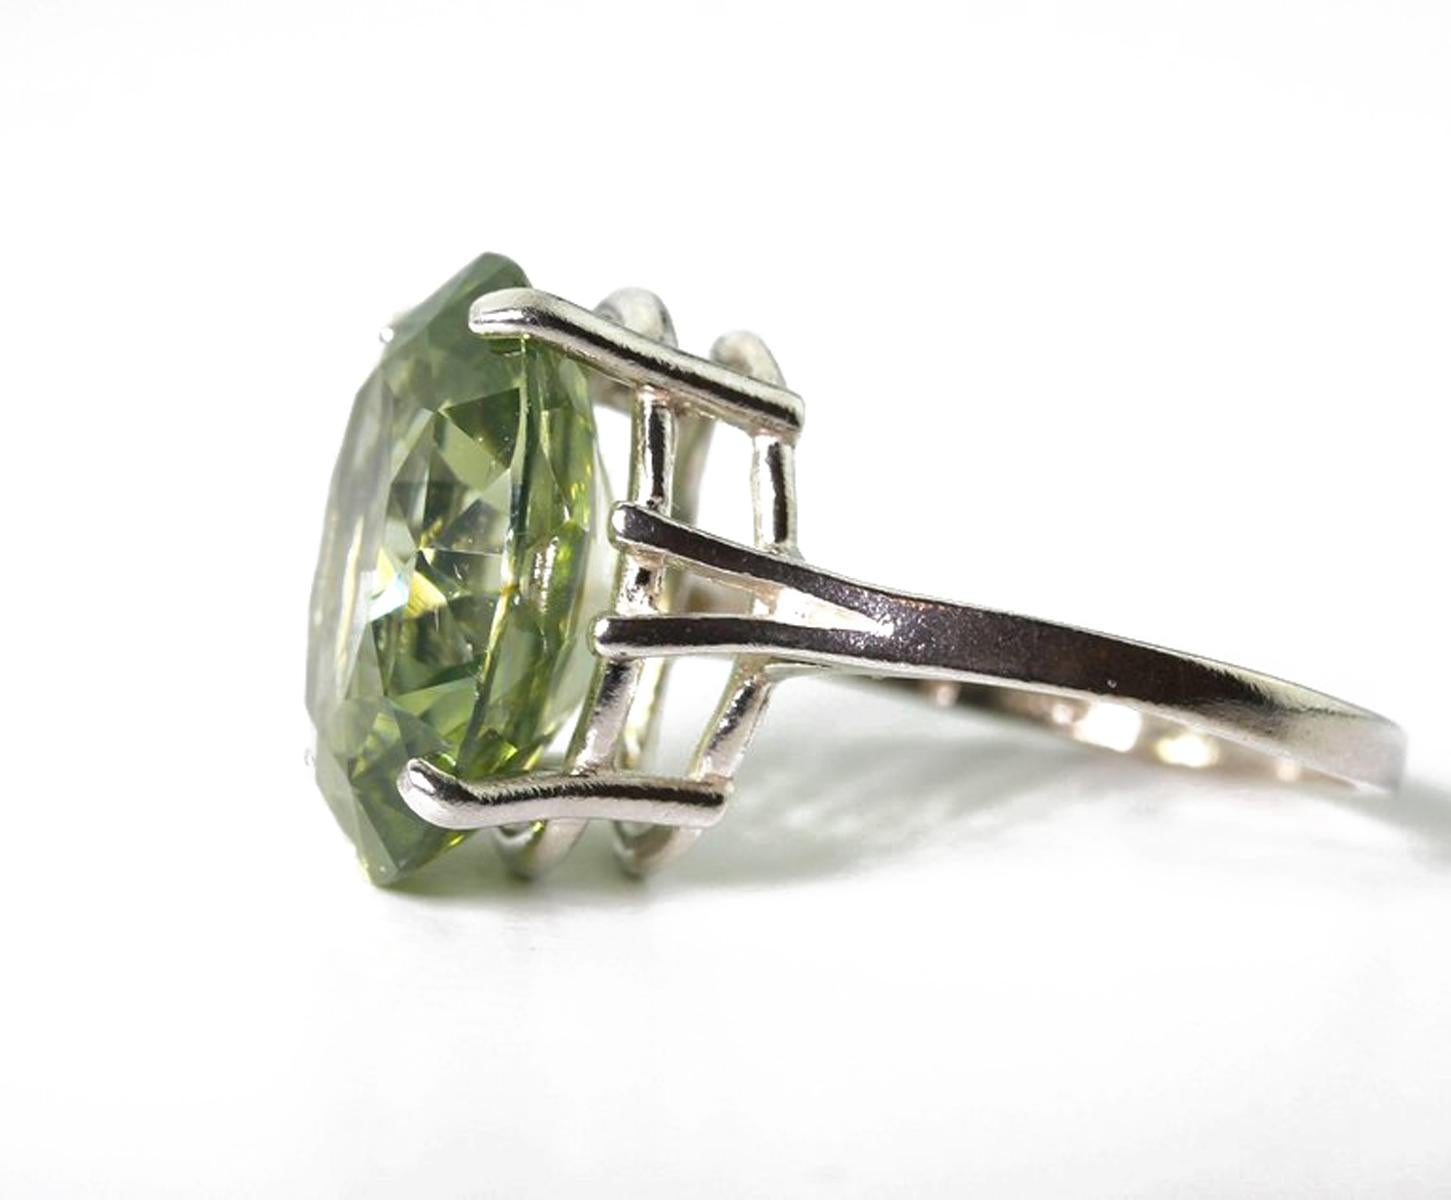 AJD Gorgeous 14.48 Cts Oval Natural Sri Lankan Green Zircon Cocktail Ring For Sale 1